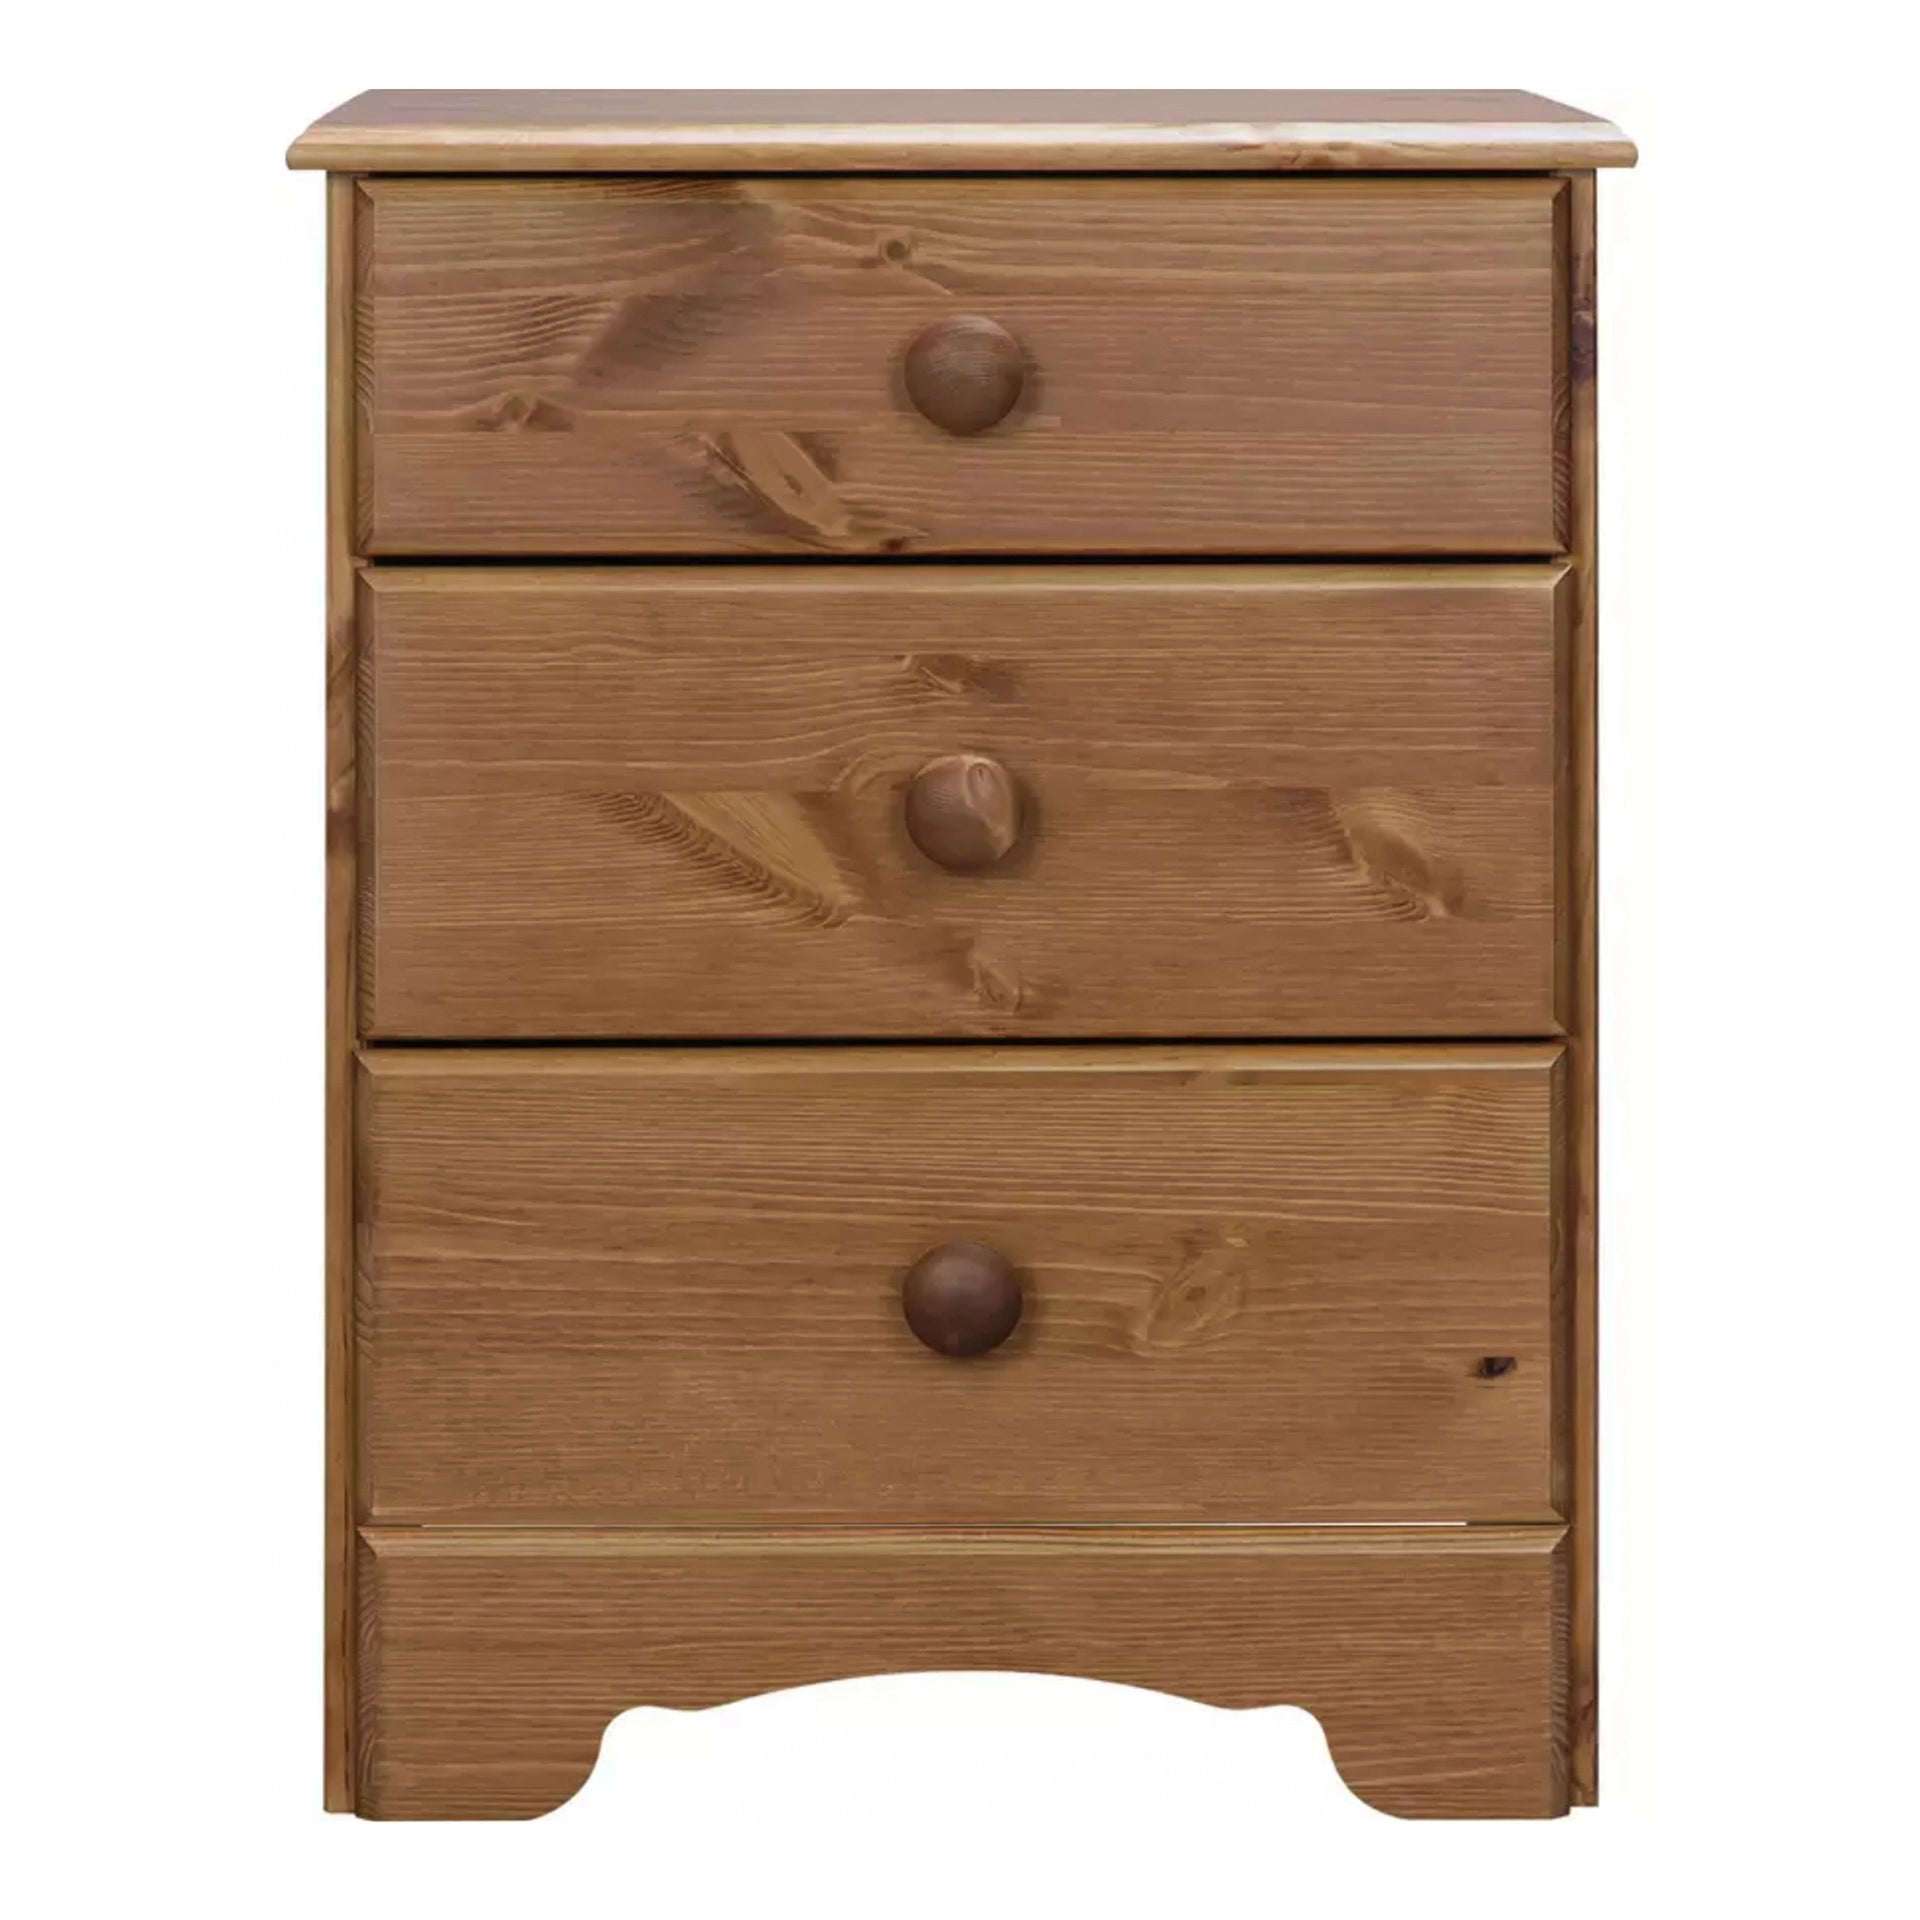 Furniture To Go Nordic Bedside Table 3 Drawers, Cherry